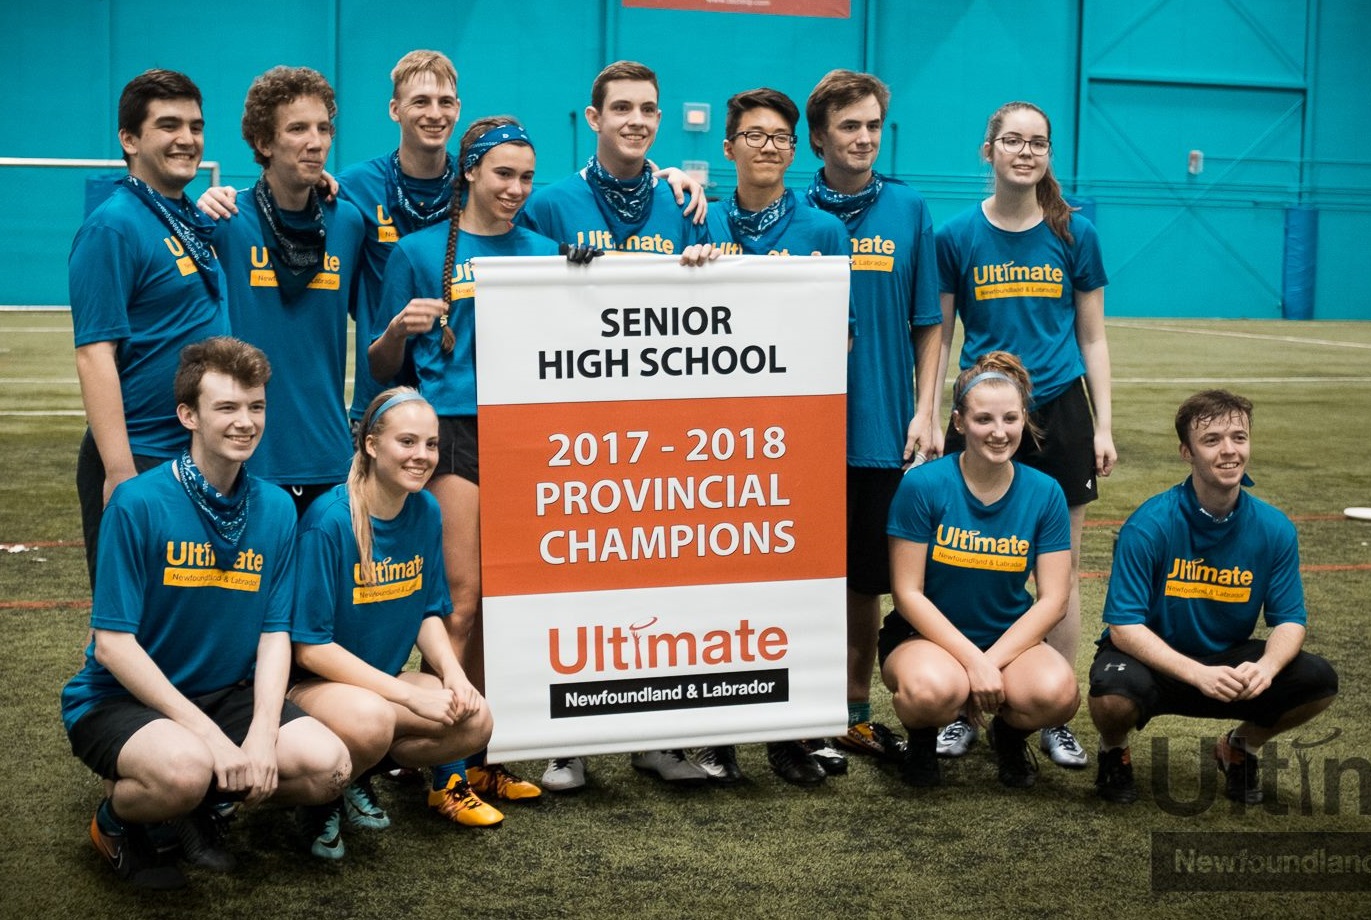 Mount Pearl Senior High won the coveted 2017-2018 provincial championship.